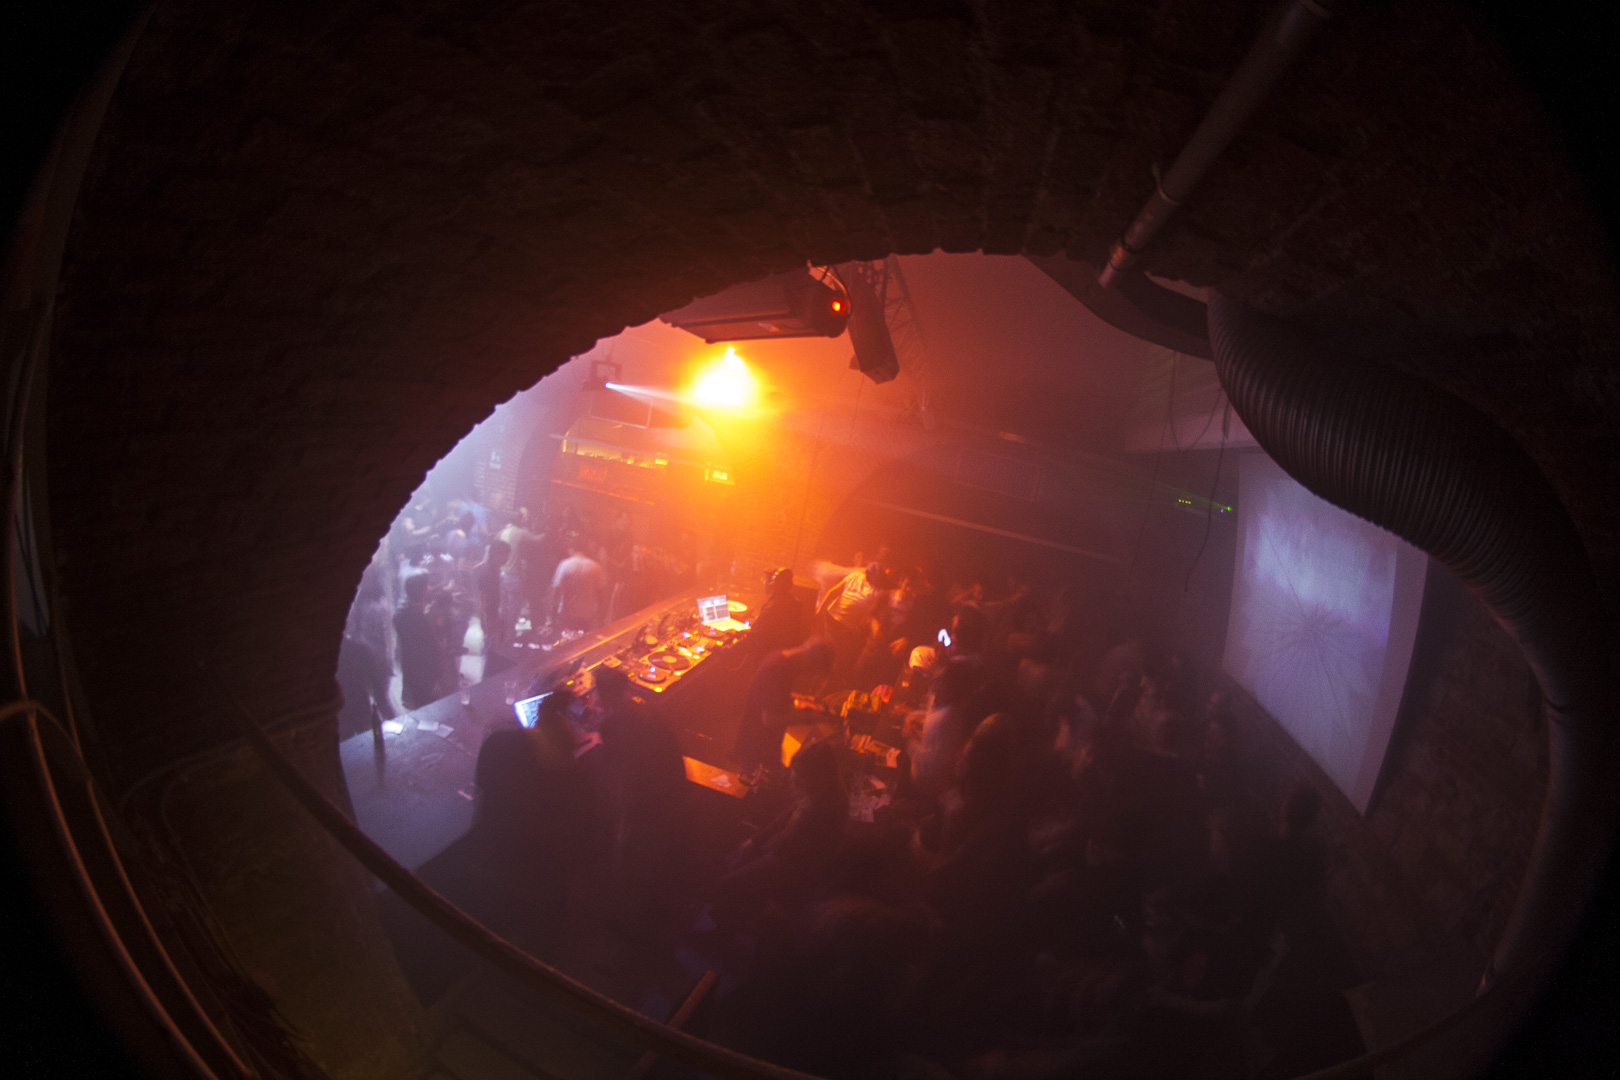 Carl Craig at Jam Club Music Party by Xplosiva – Turin, Italy